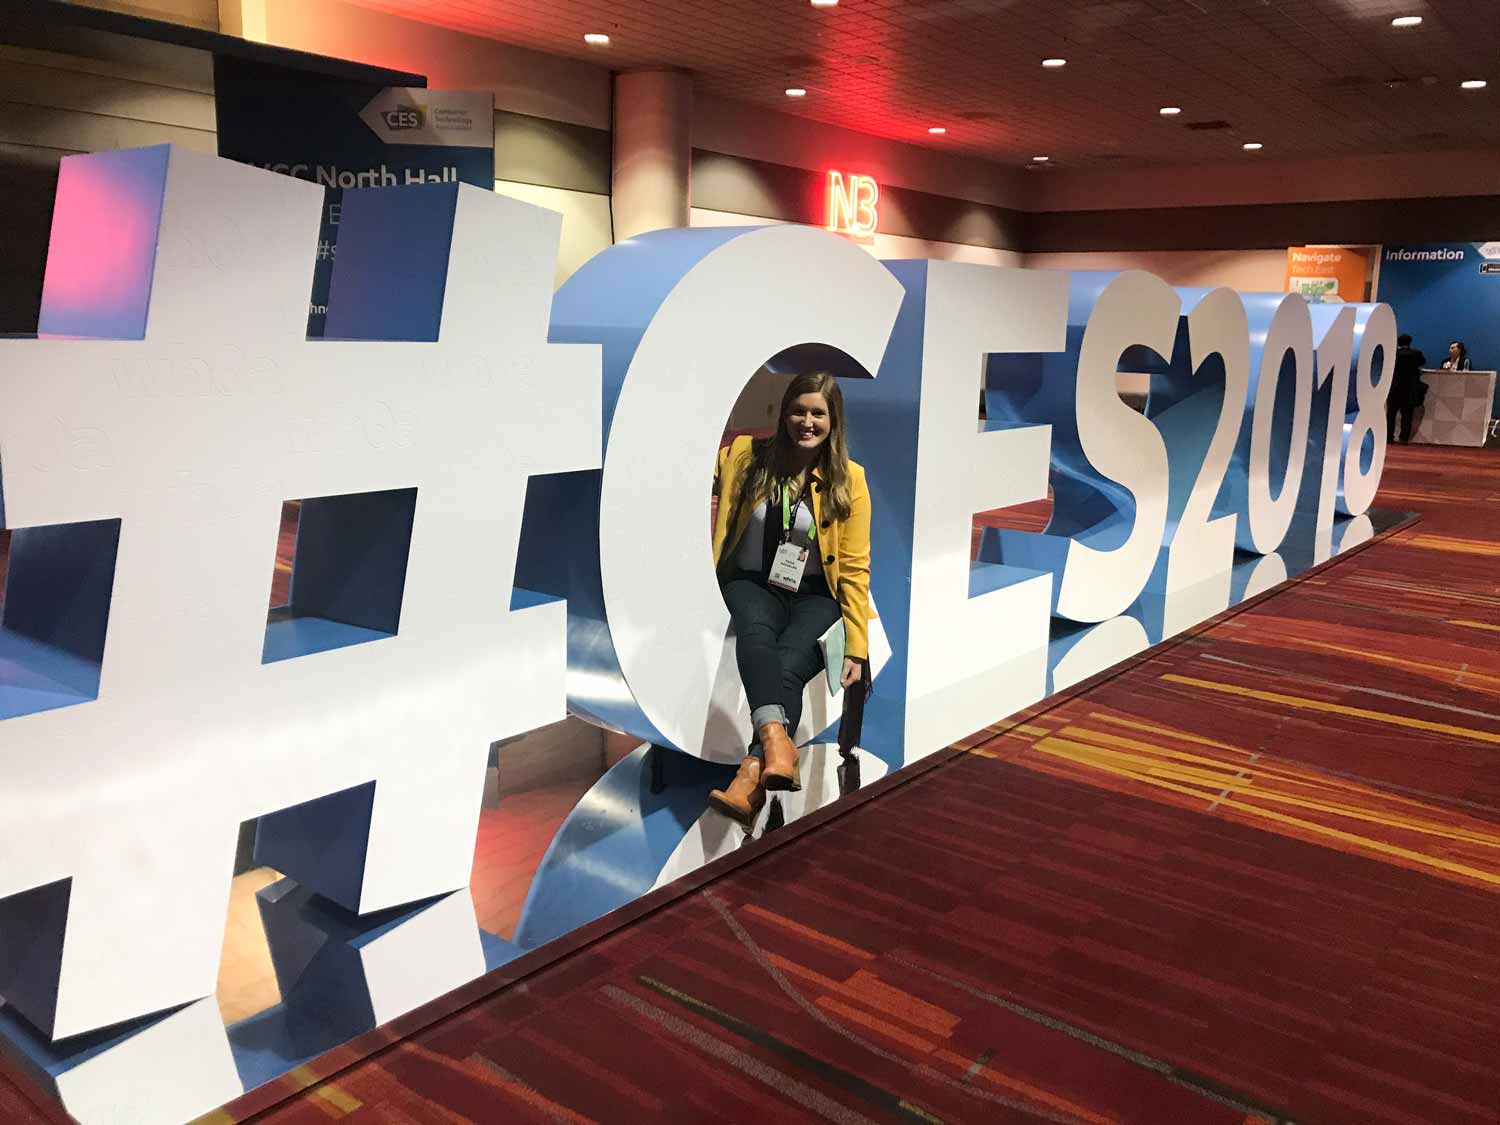 Paige Kassalen at CES2018 sitting in the hashtag logo display.